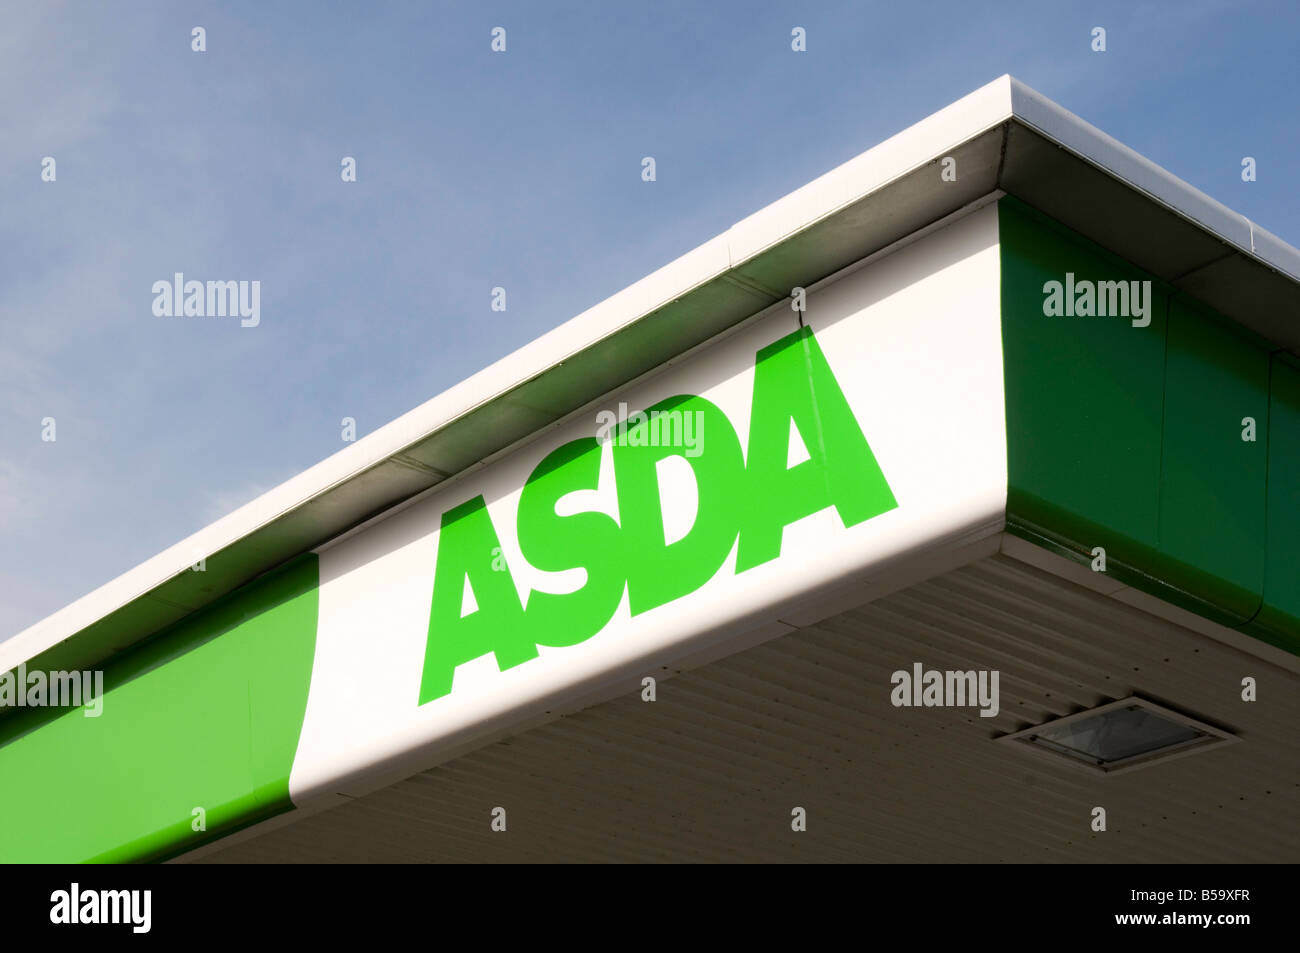 asda supermarket hypermarket supermarkets retail retailer out of town superstore food clothes 24 hour opening hrs open all night Stock Photo